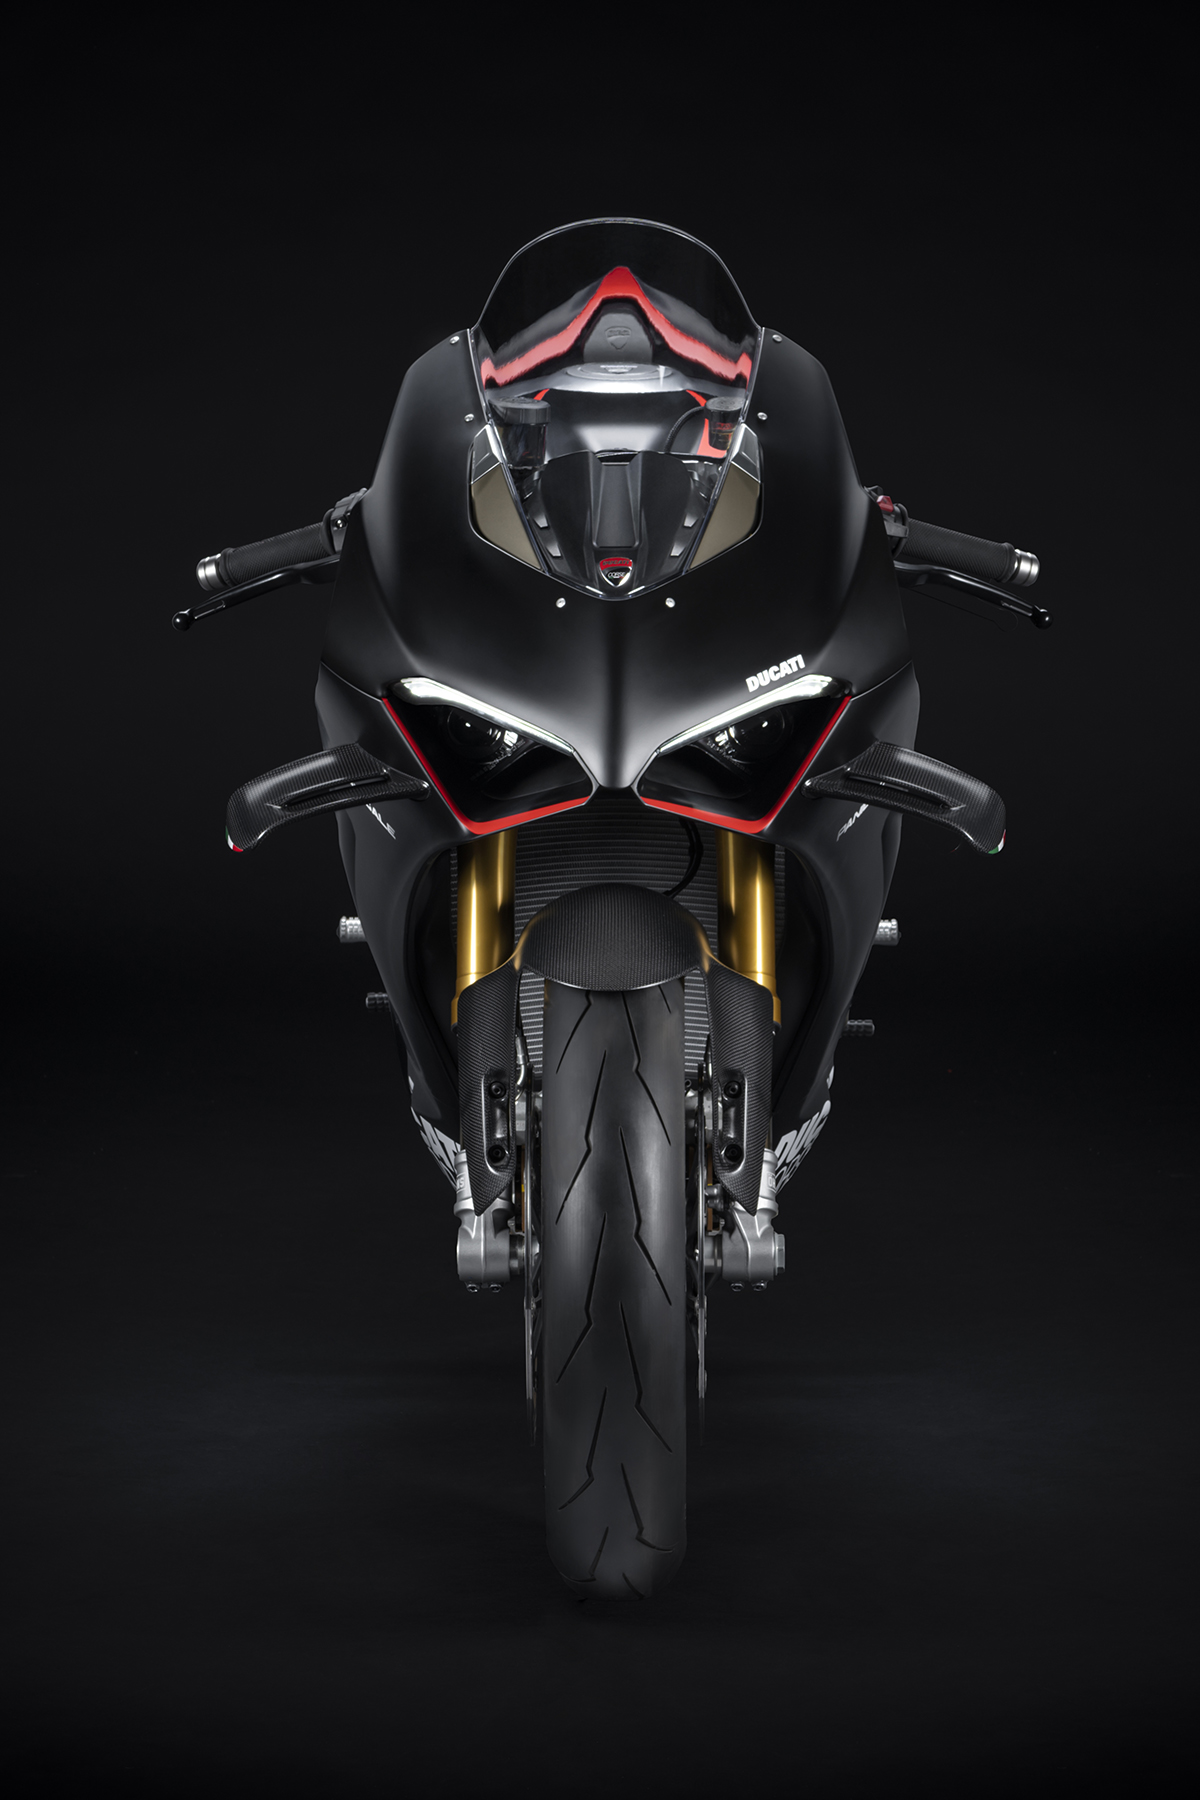 Ducati Panigale V4 SP2 frontal fx